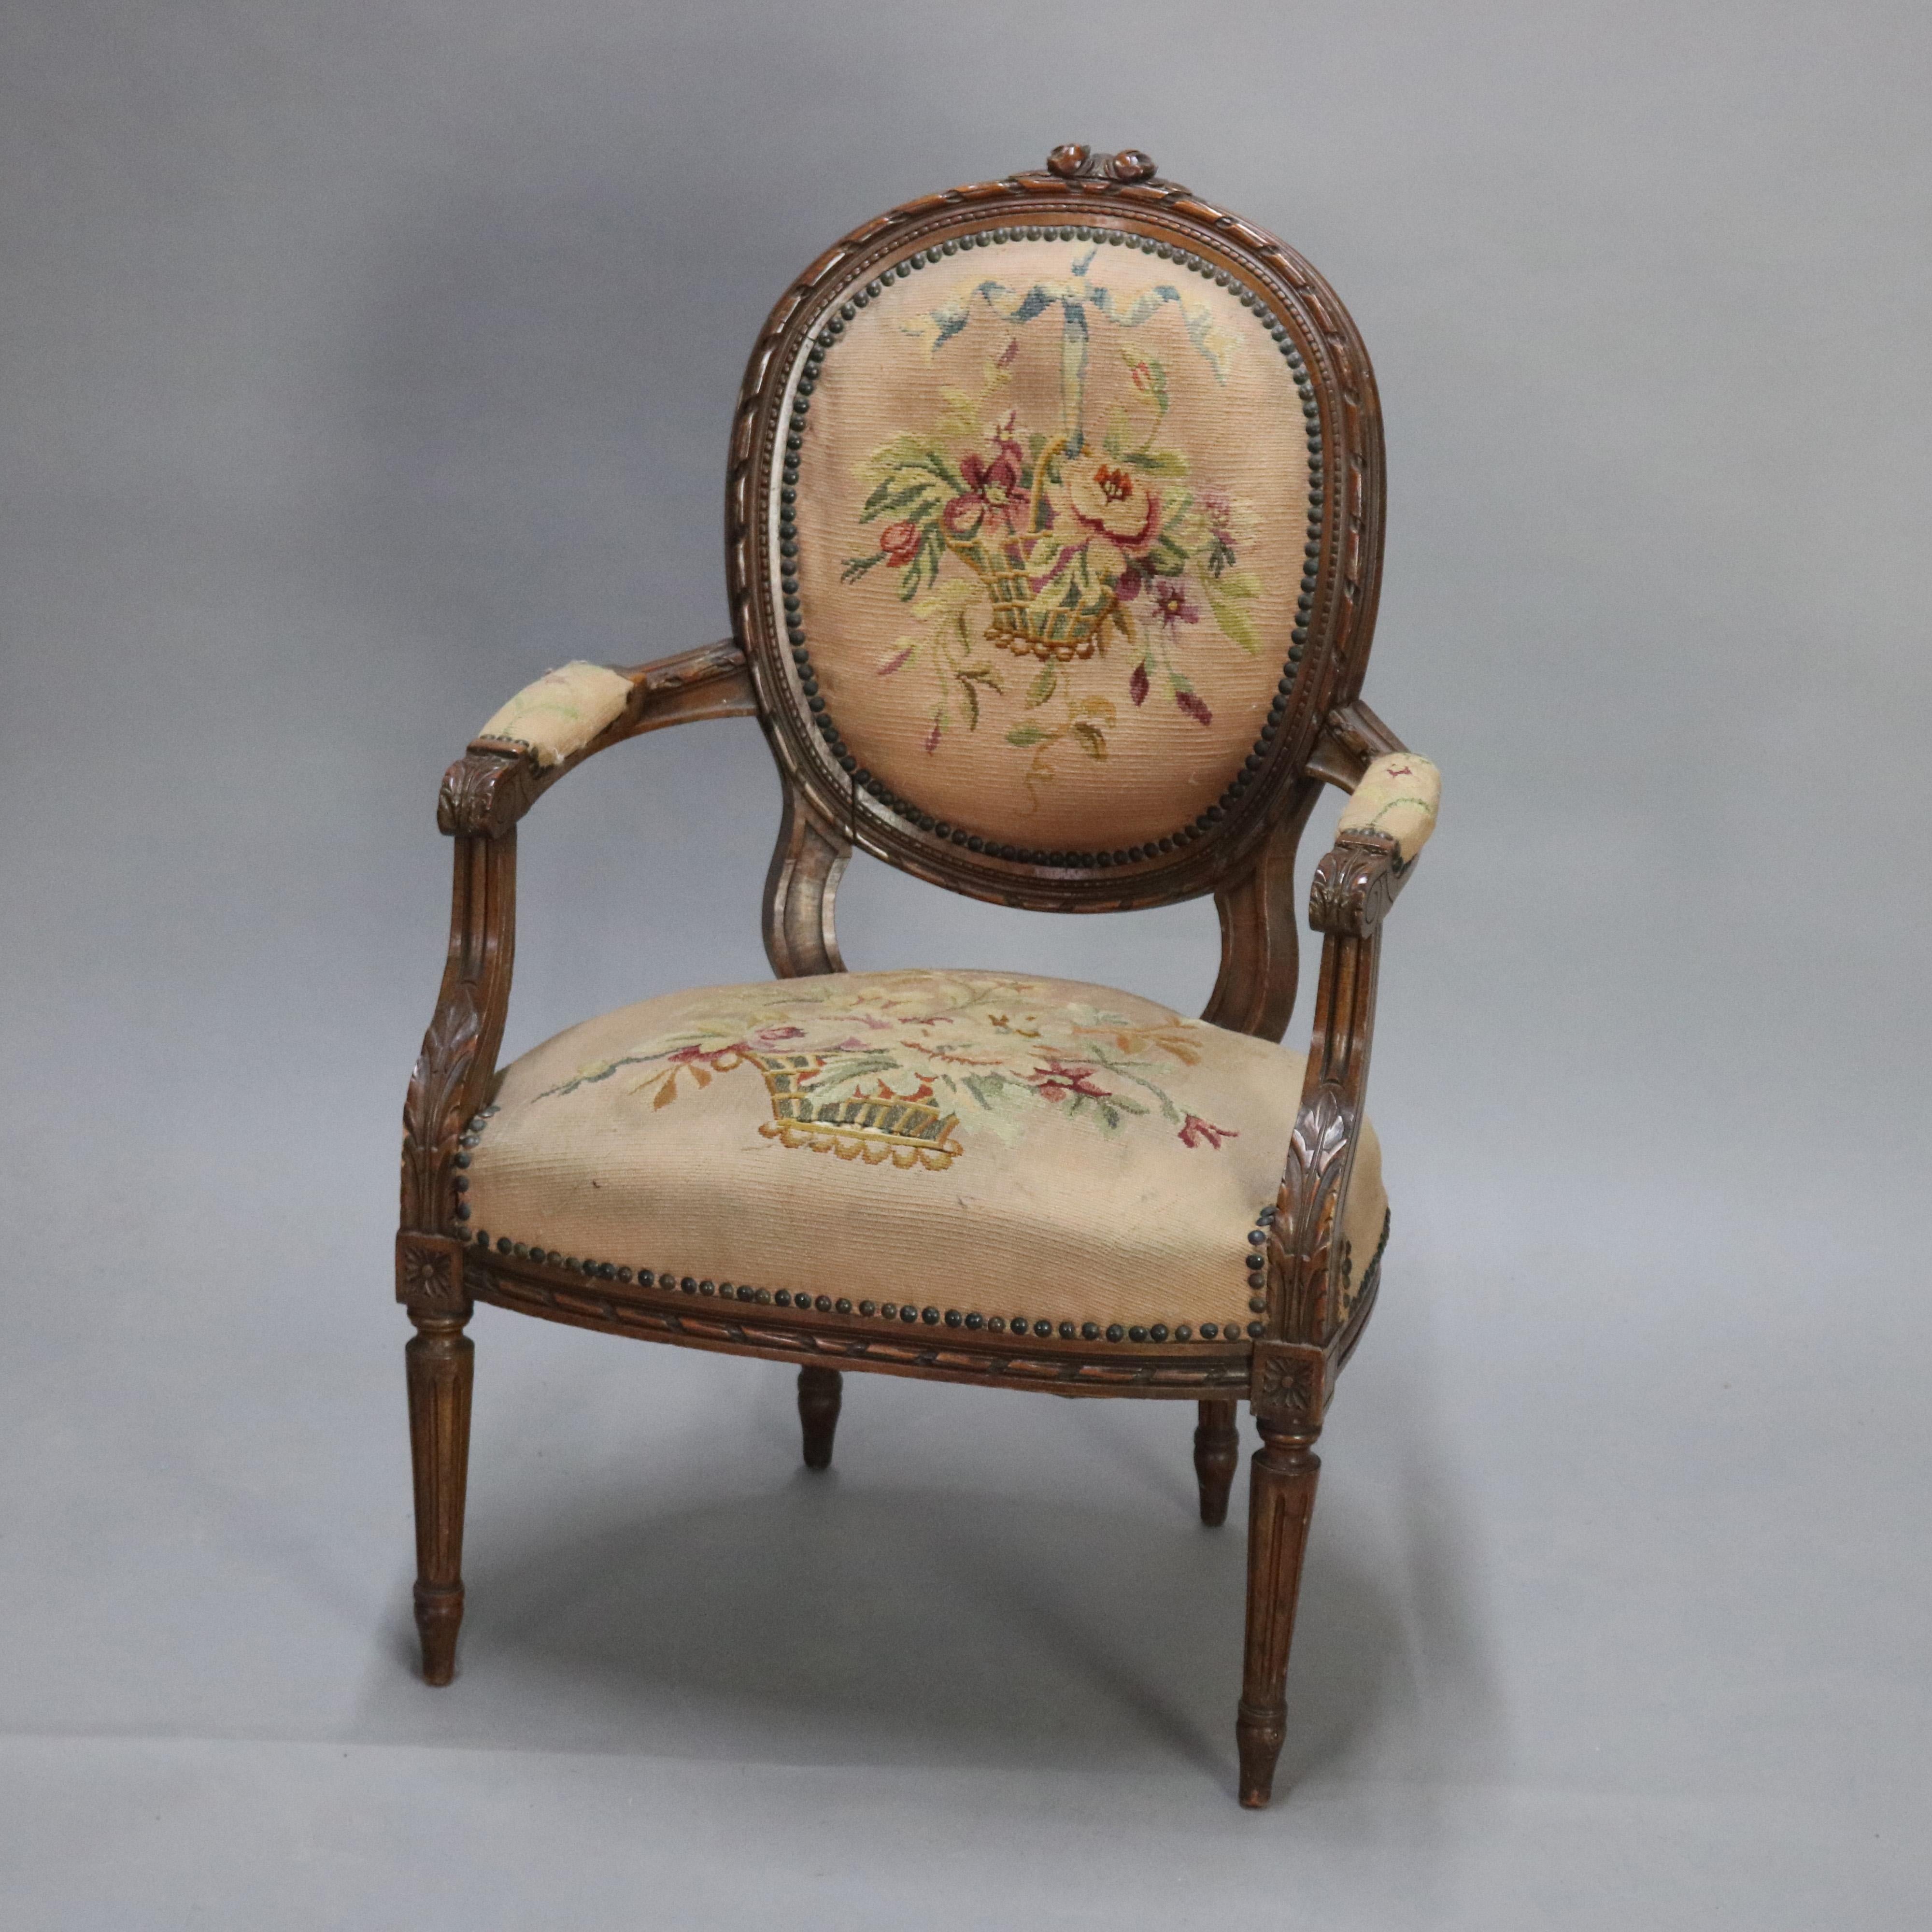 An antique French Louis XV armchair offers carved fruitwood frame with carved floral crest and ribbon form frame, rosettes, acanthus arms, floral panier de fleurs needlepoint back and seat, raised on tapered reeded legs, 19th century

Measures: